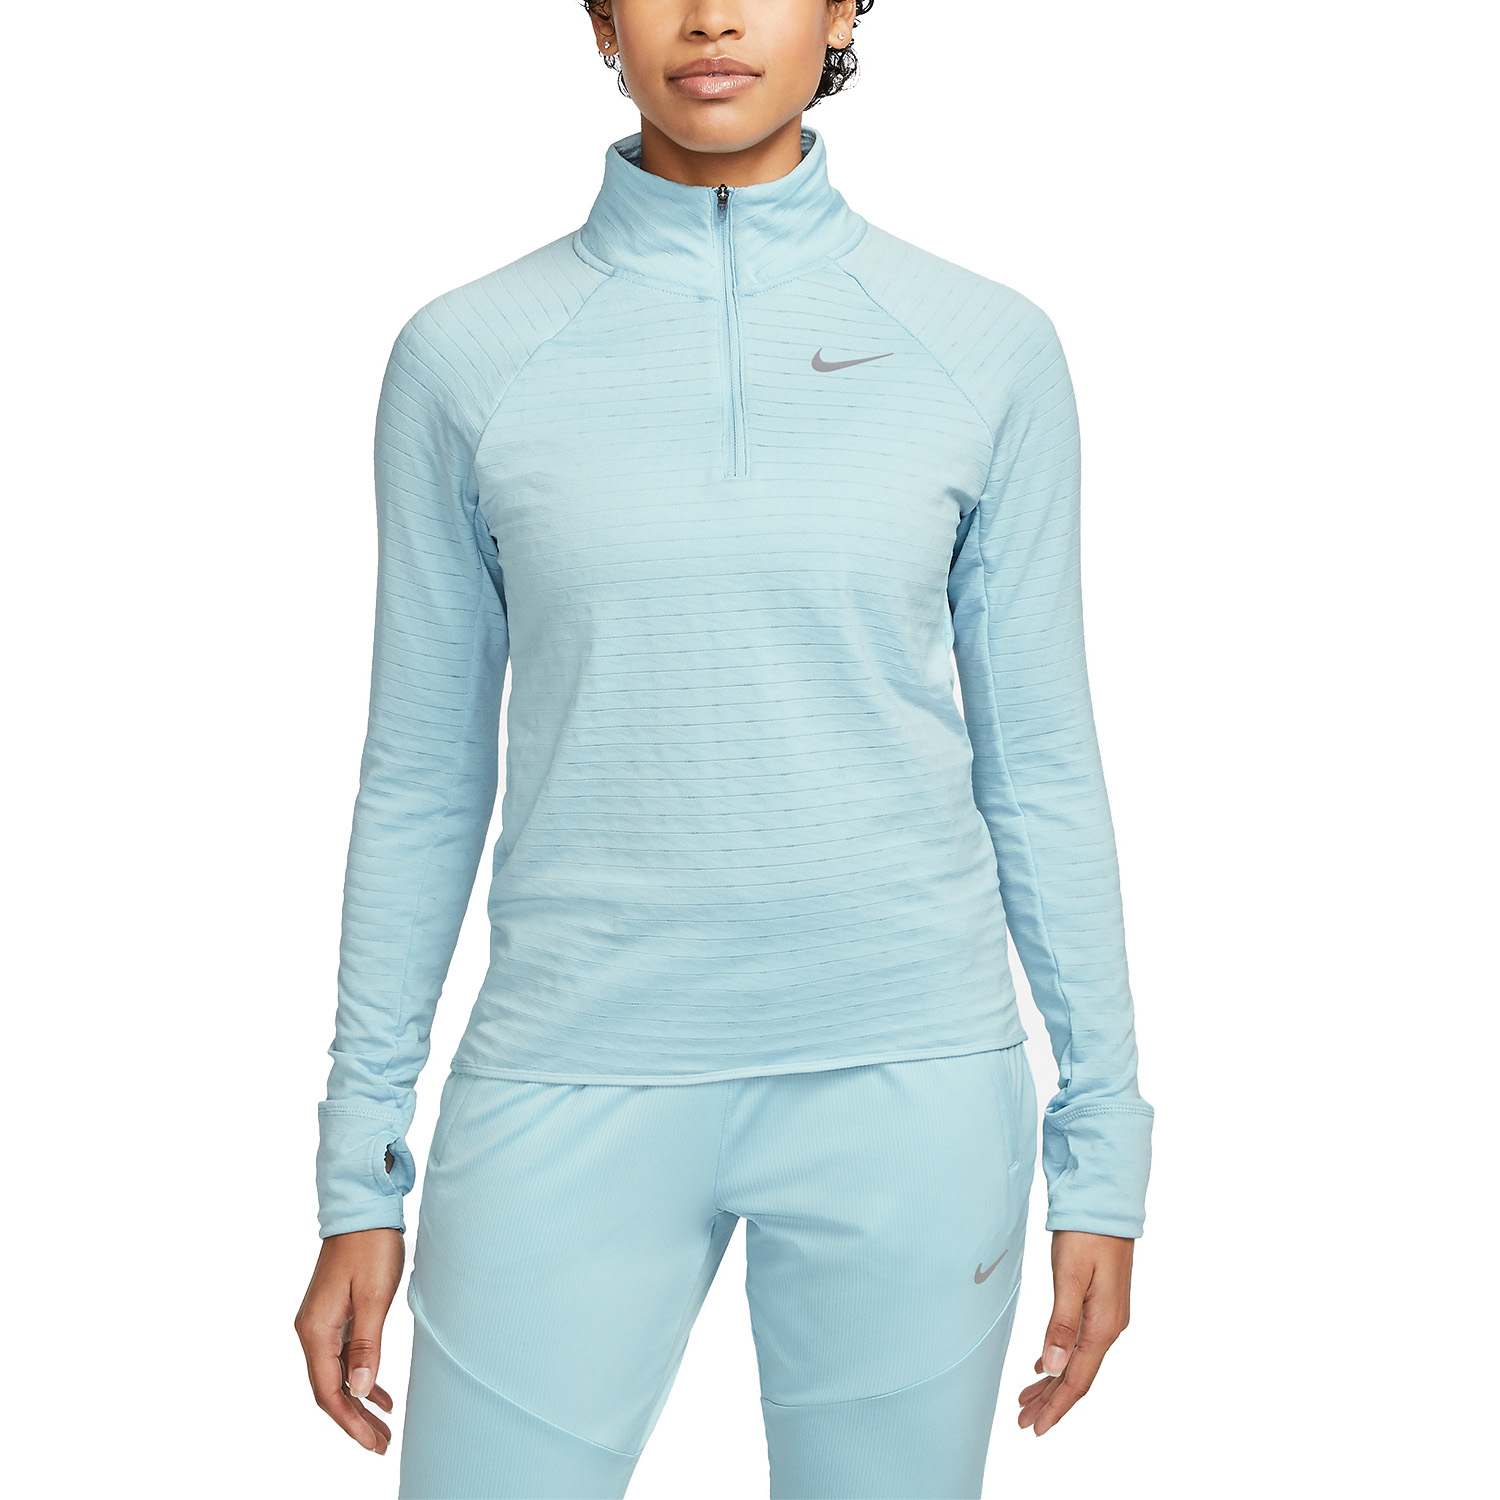 Nike Therma-FIT Element Shirt - Ocean Bliss/Reflective Silver